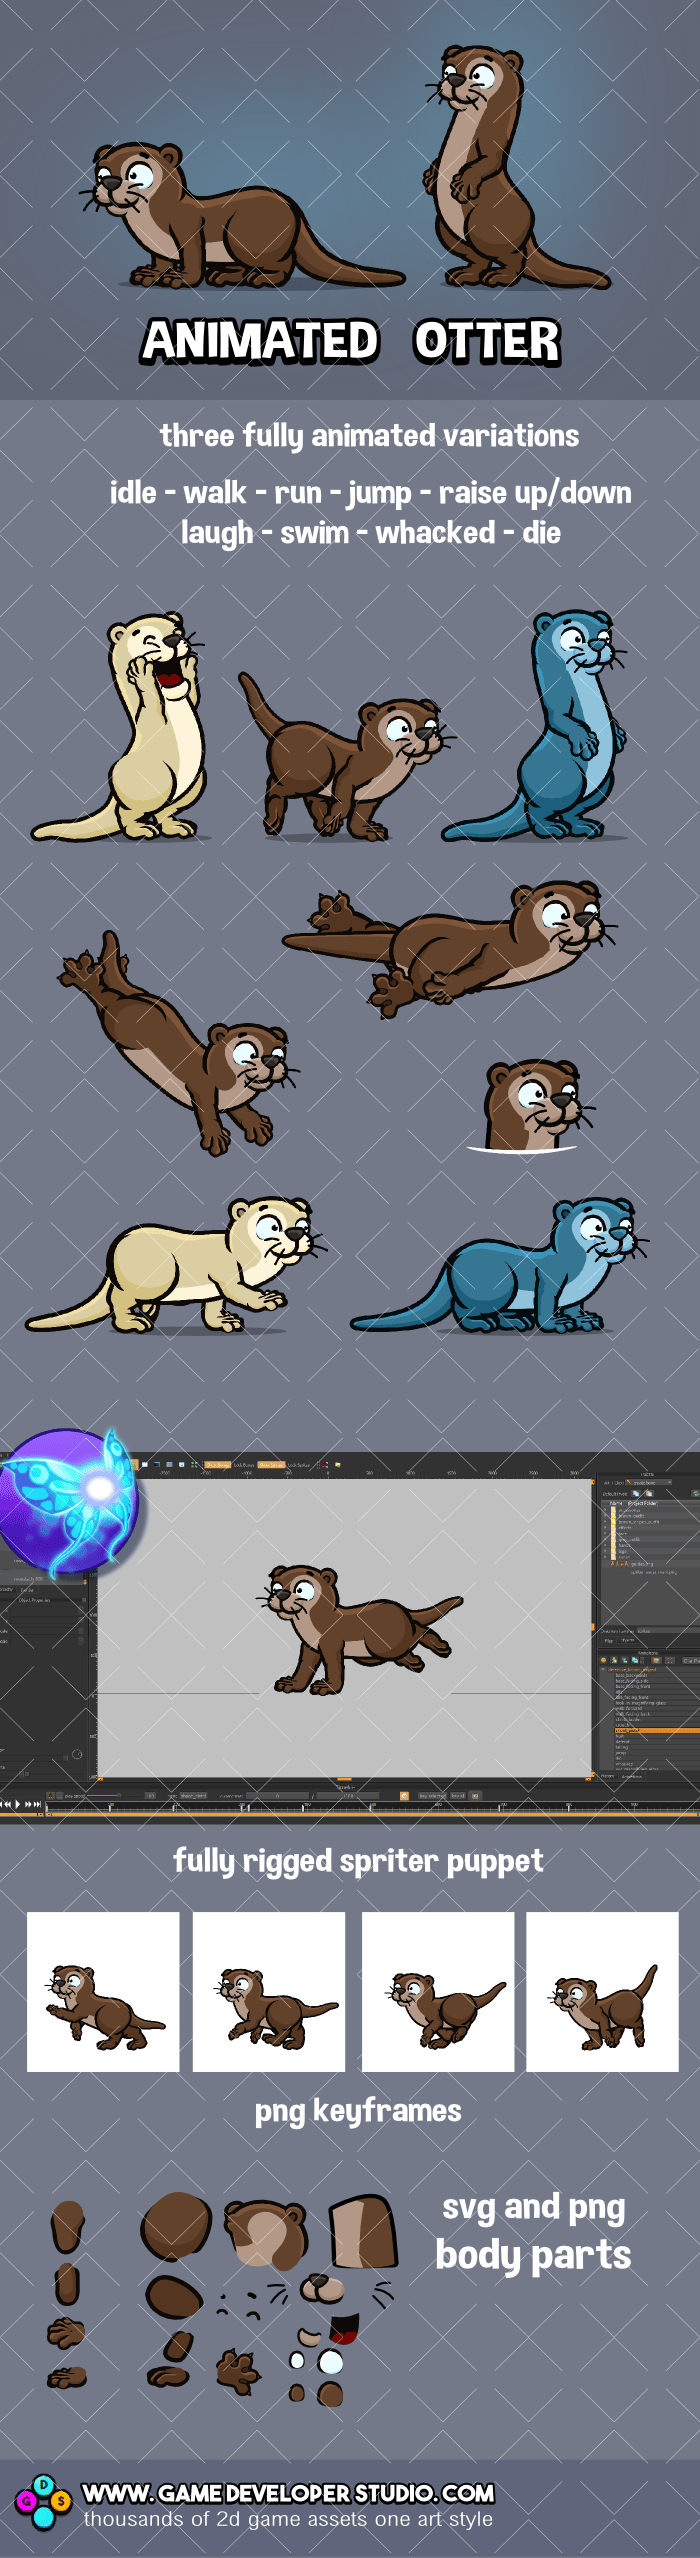 animated otter game sprite